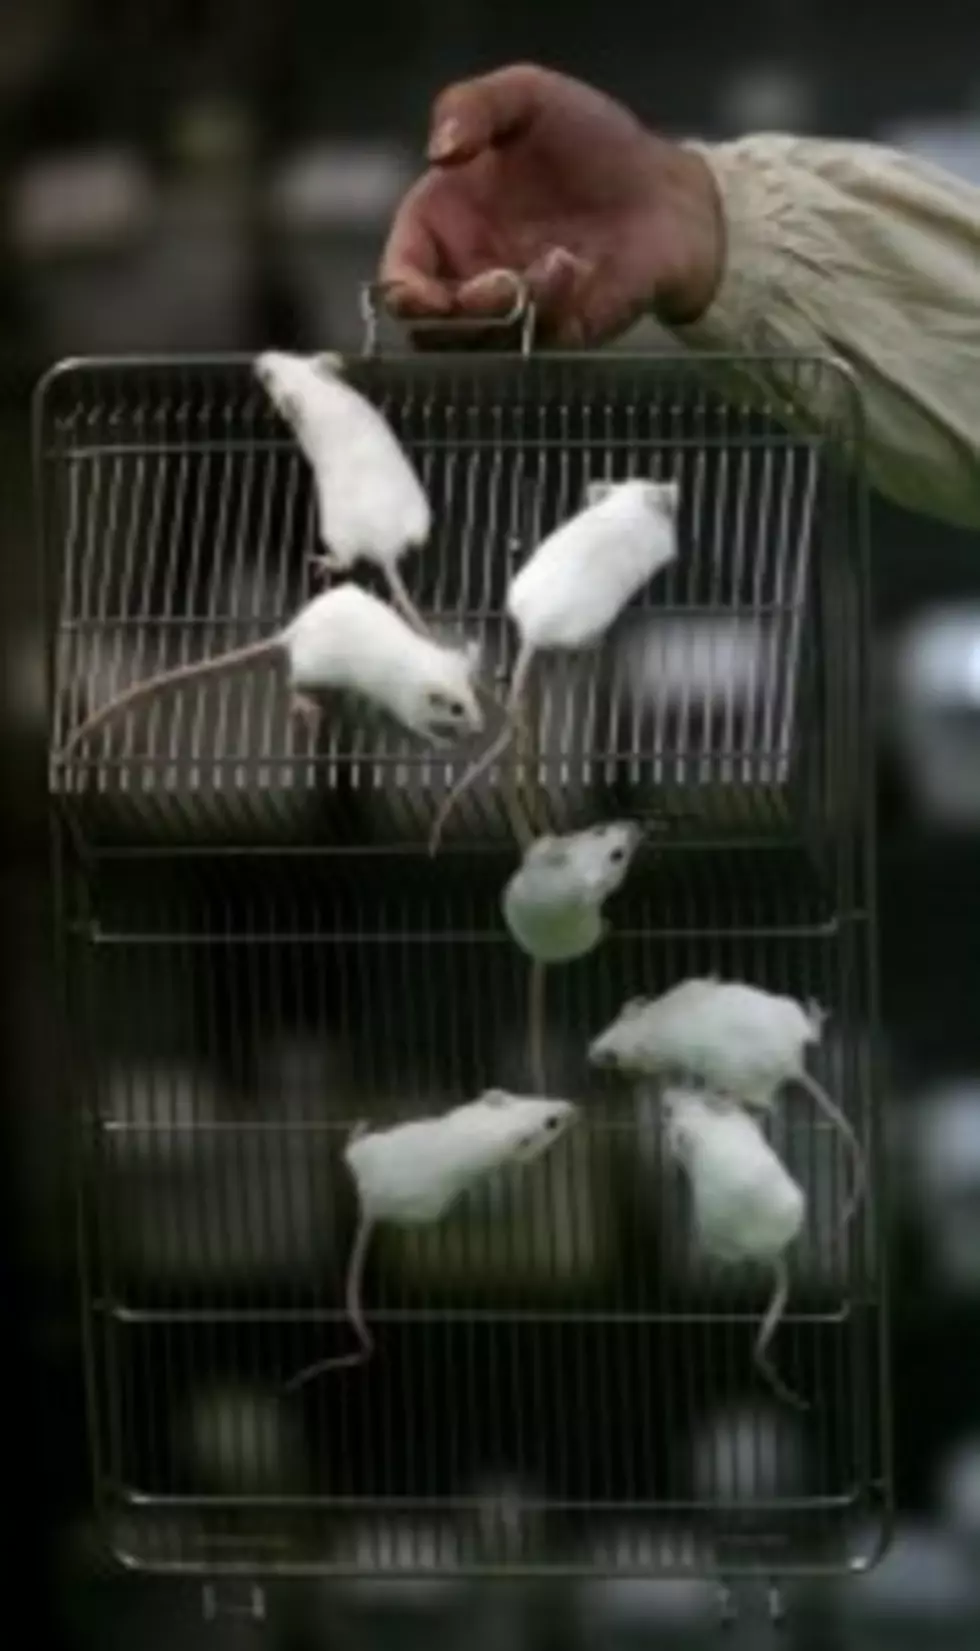 Bar Busted For Illegal Mouse Racing. WTF?